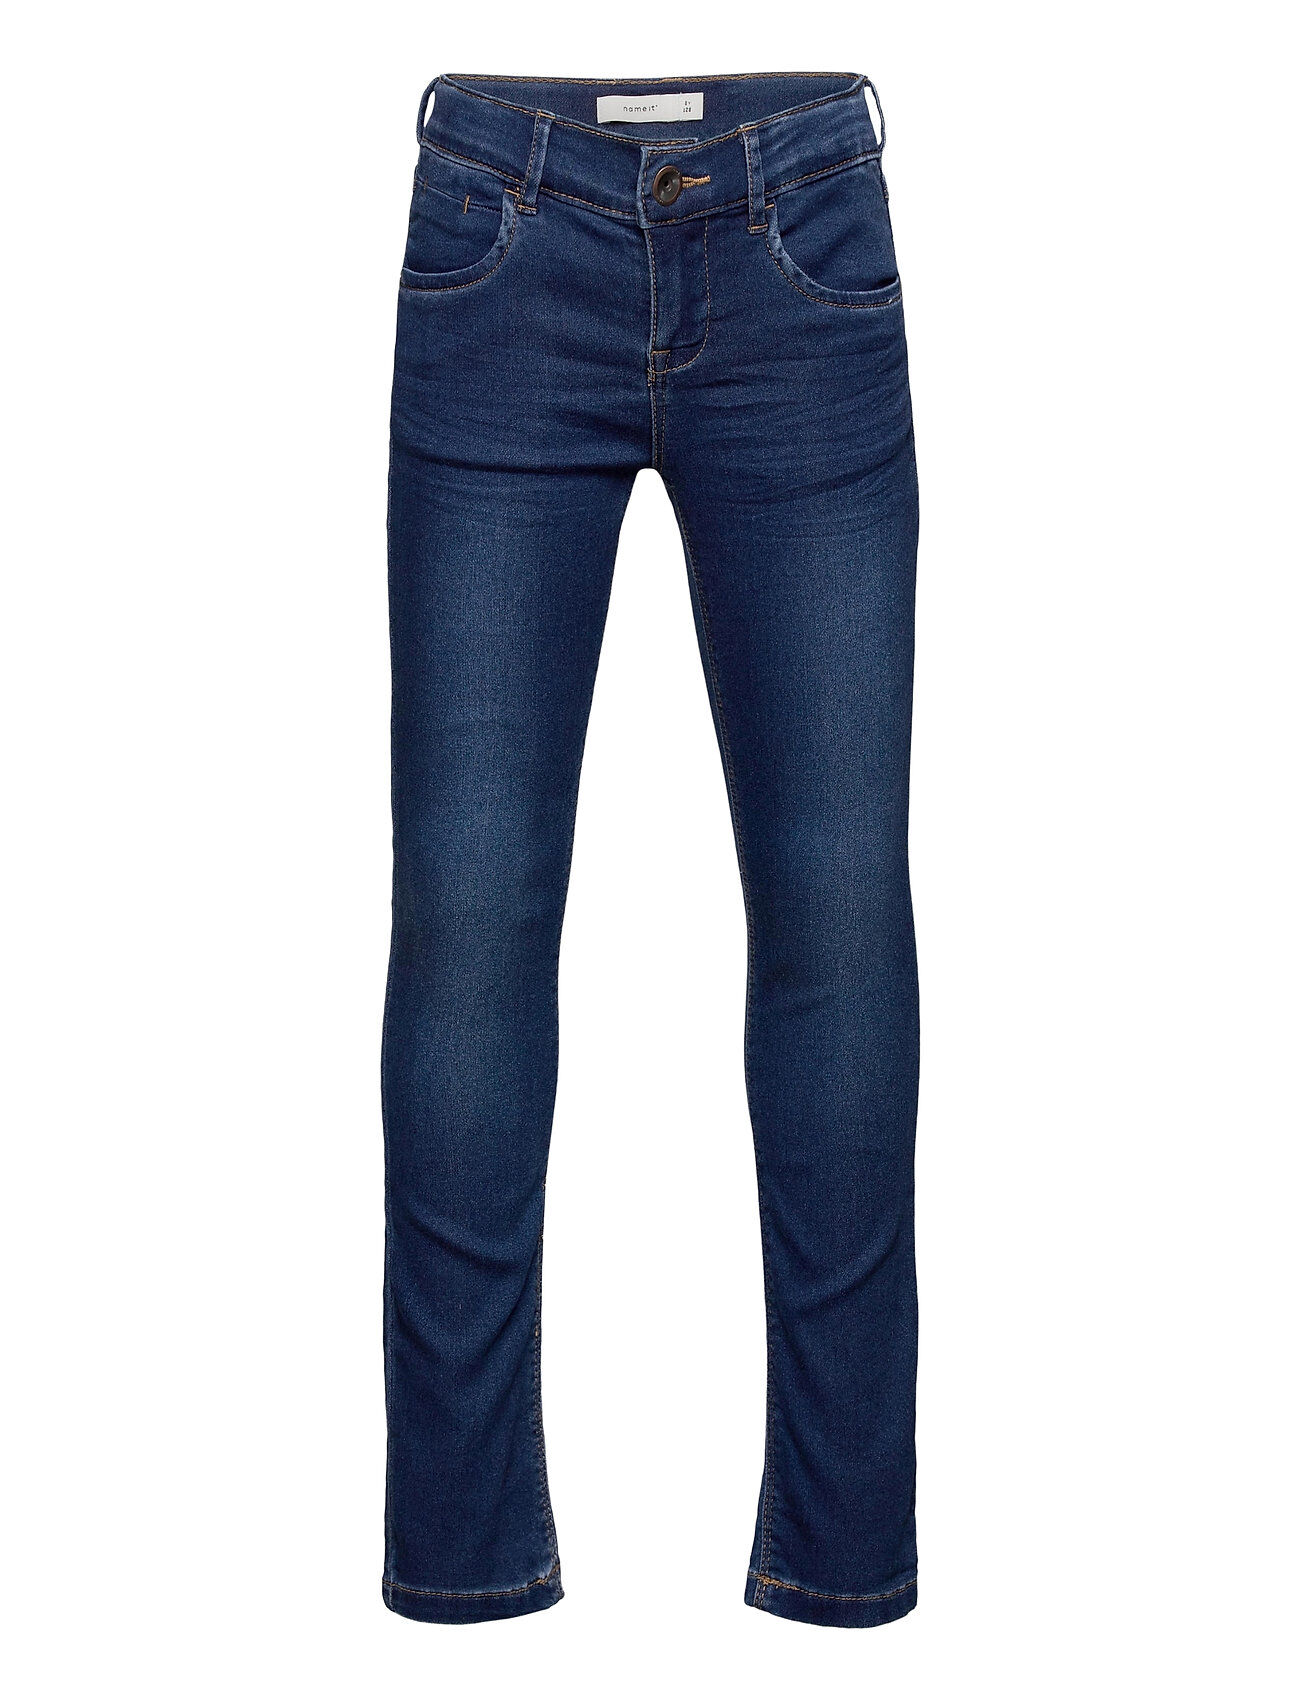 name it Nkfsalli Dnmthayers 3391 Swe Pant Noos Jeans Straight Jeans Blå Name It